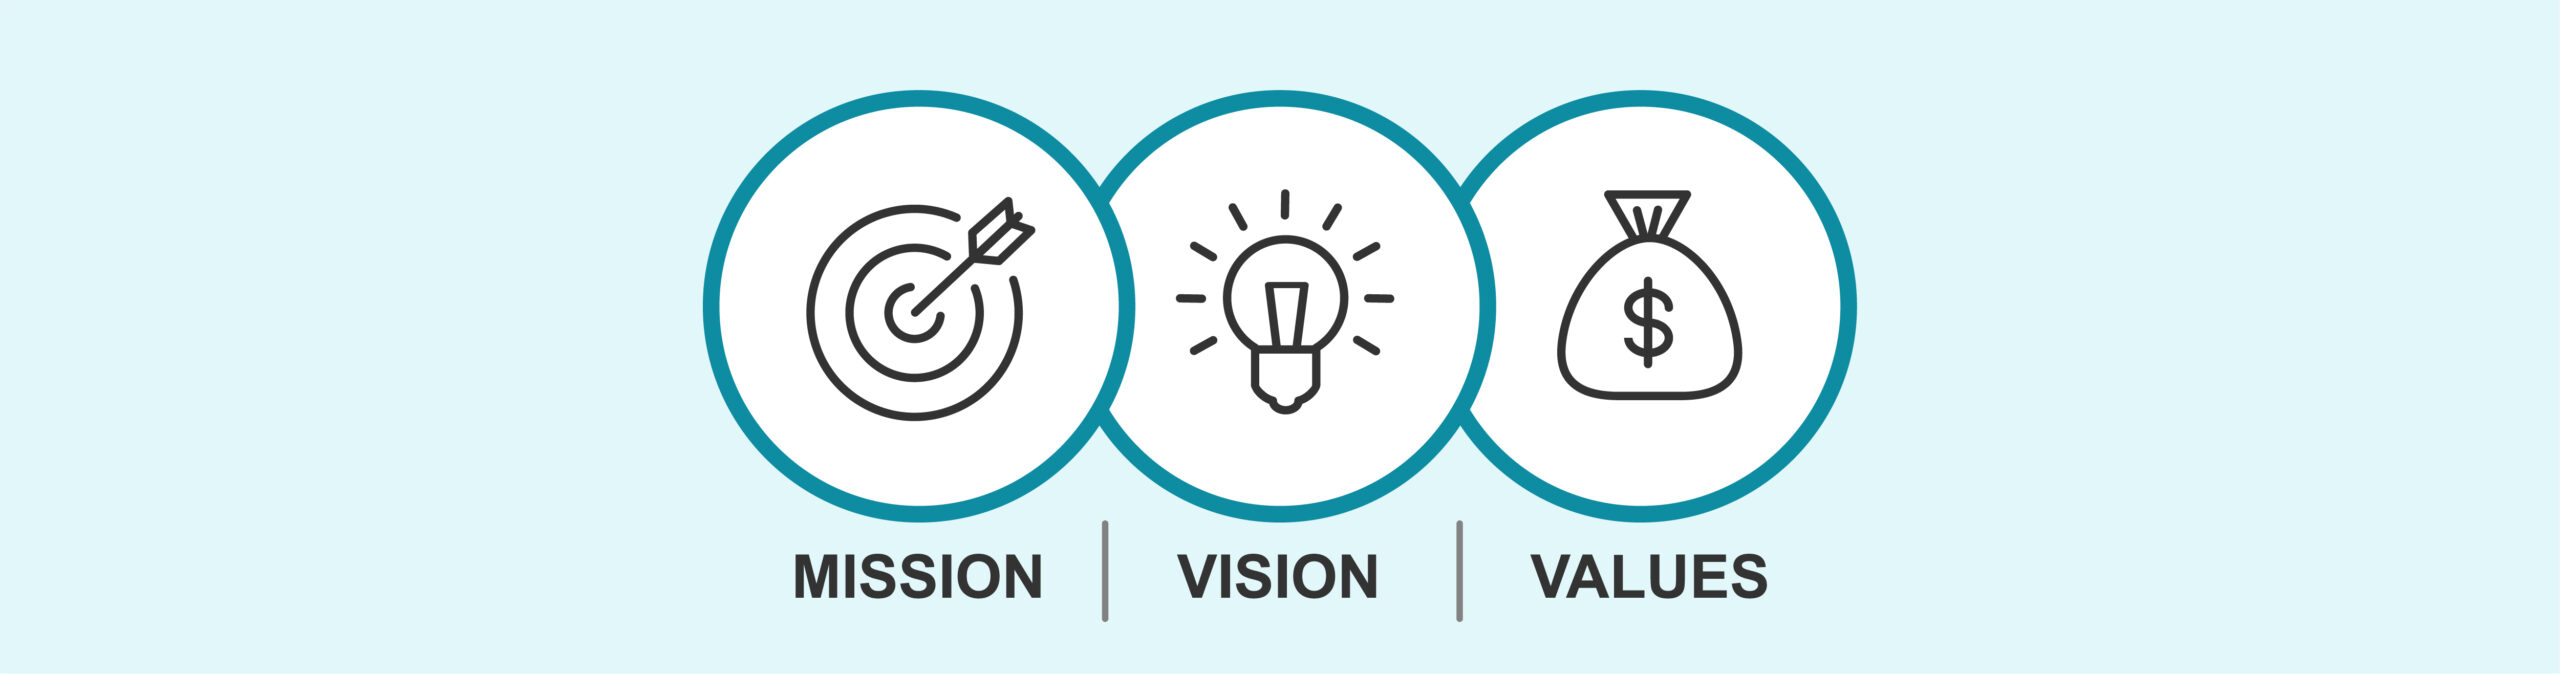 Icons for mission, vision and values of an organization or company, digital strategy objectives aligned with company objectives. - Business Motion for social media and videos